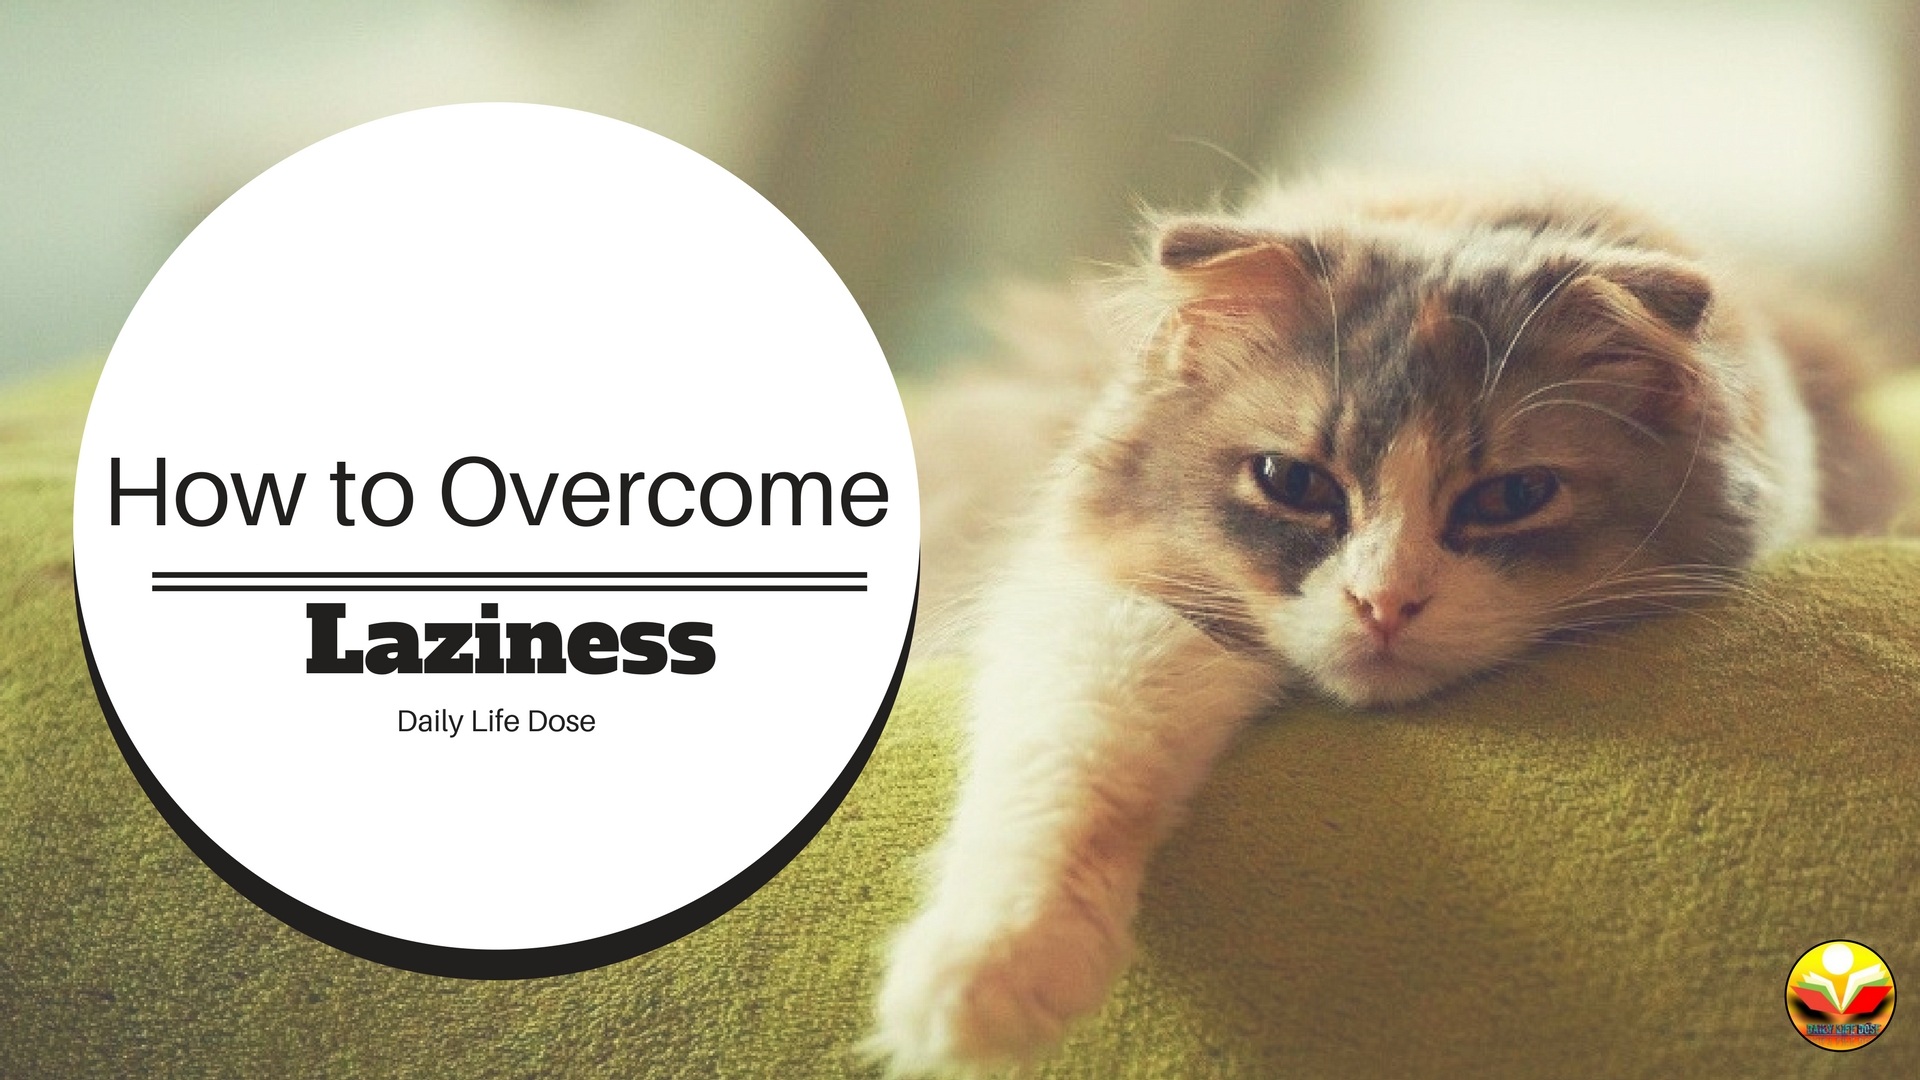 How to Overcome Laziness - 5 Daily Life Motivational Tips